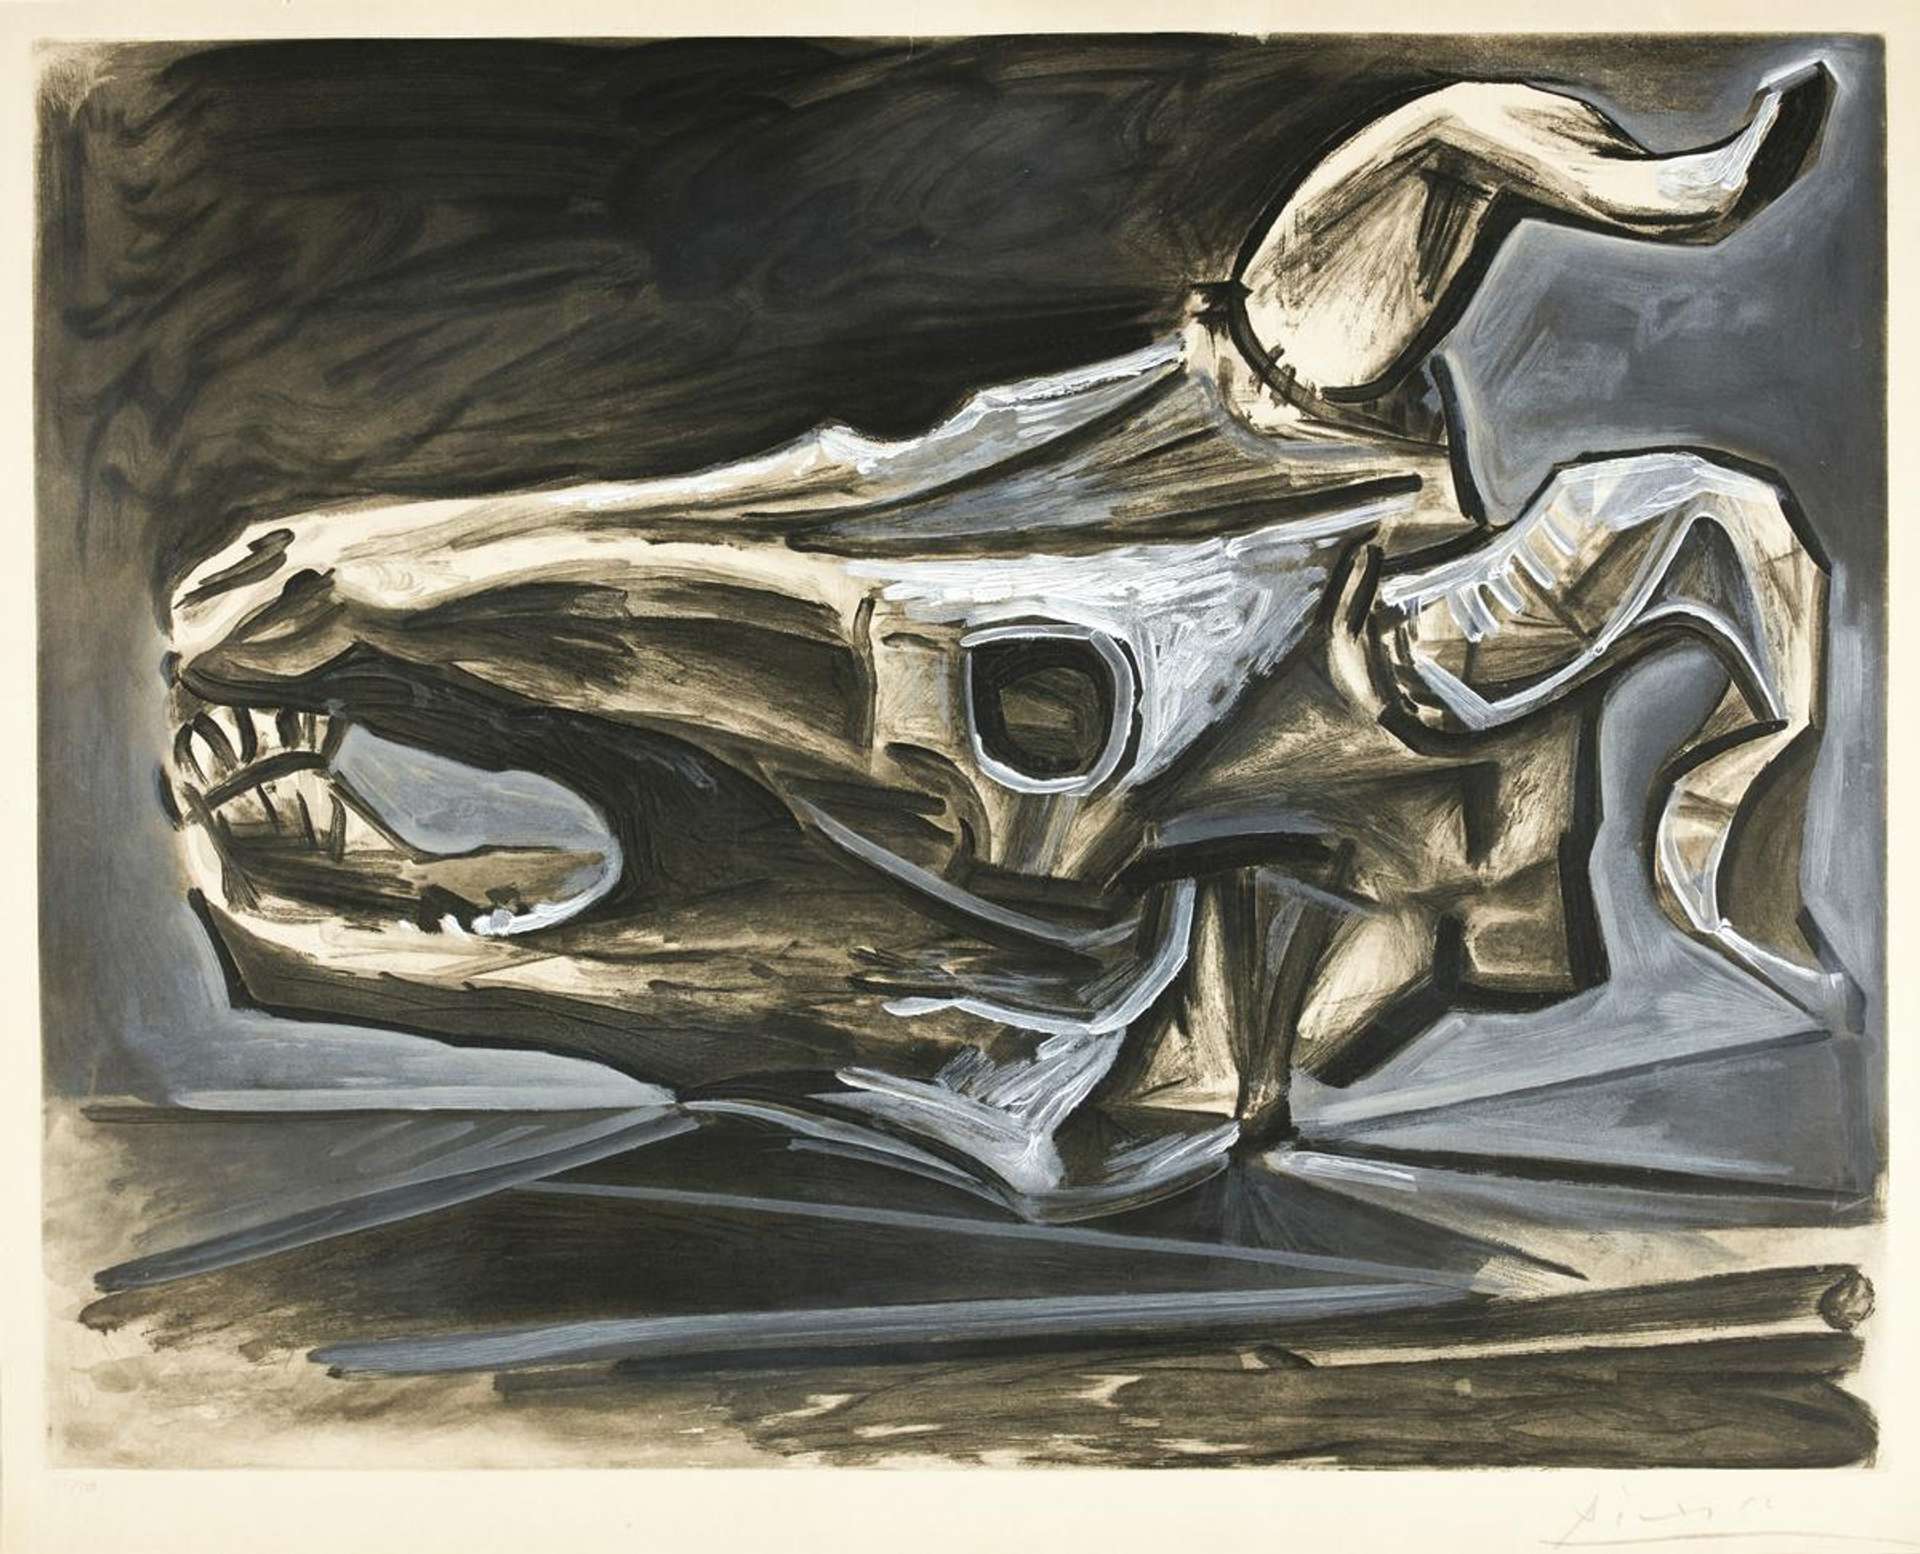 This print by Picasso shows a Goat skull on a table, in a muted colour palette.